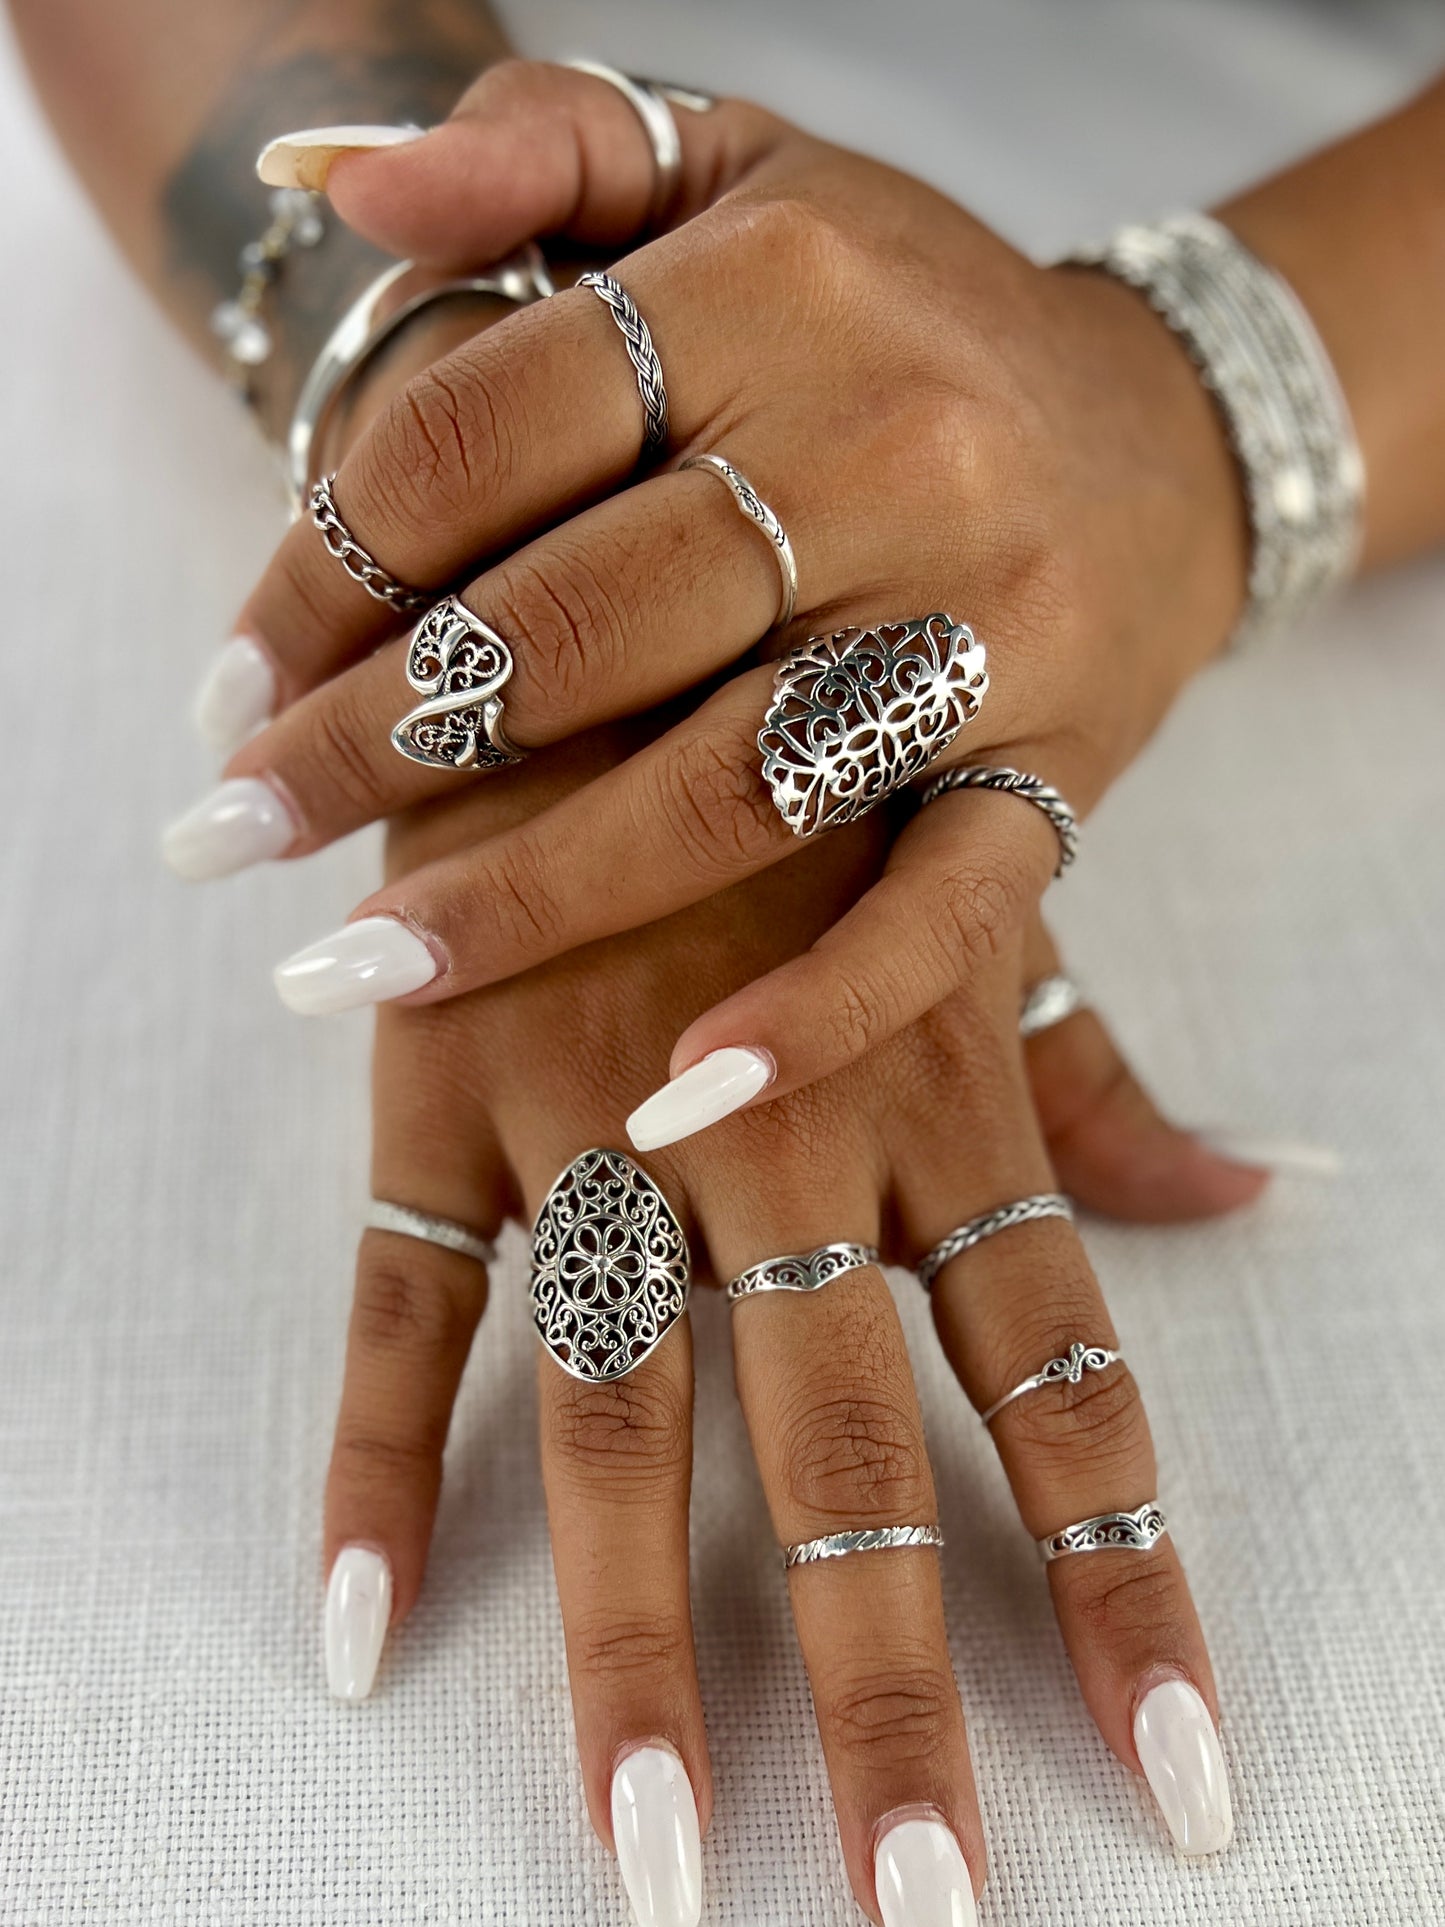 A woman's hands with intricate rings, showcasing a Floral Filigree Shield Ring.